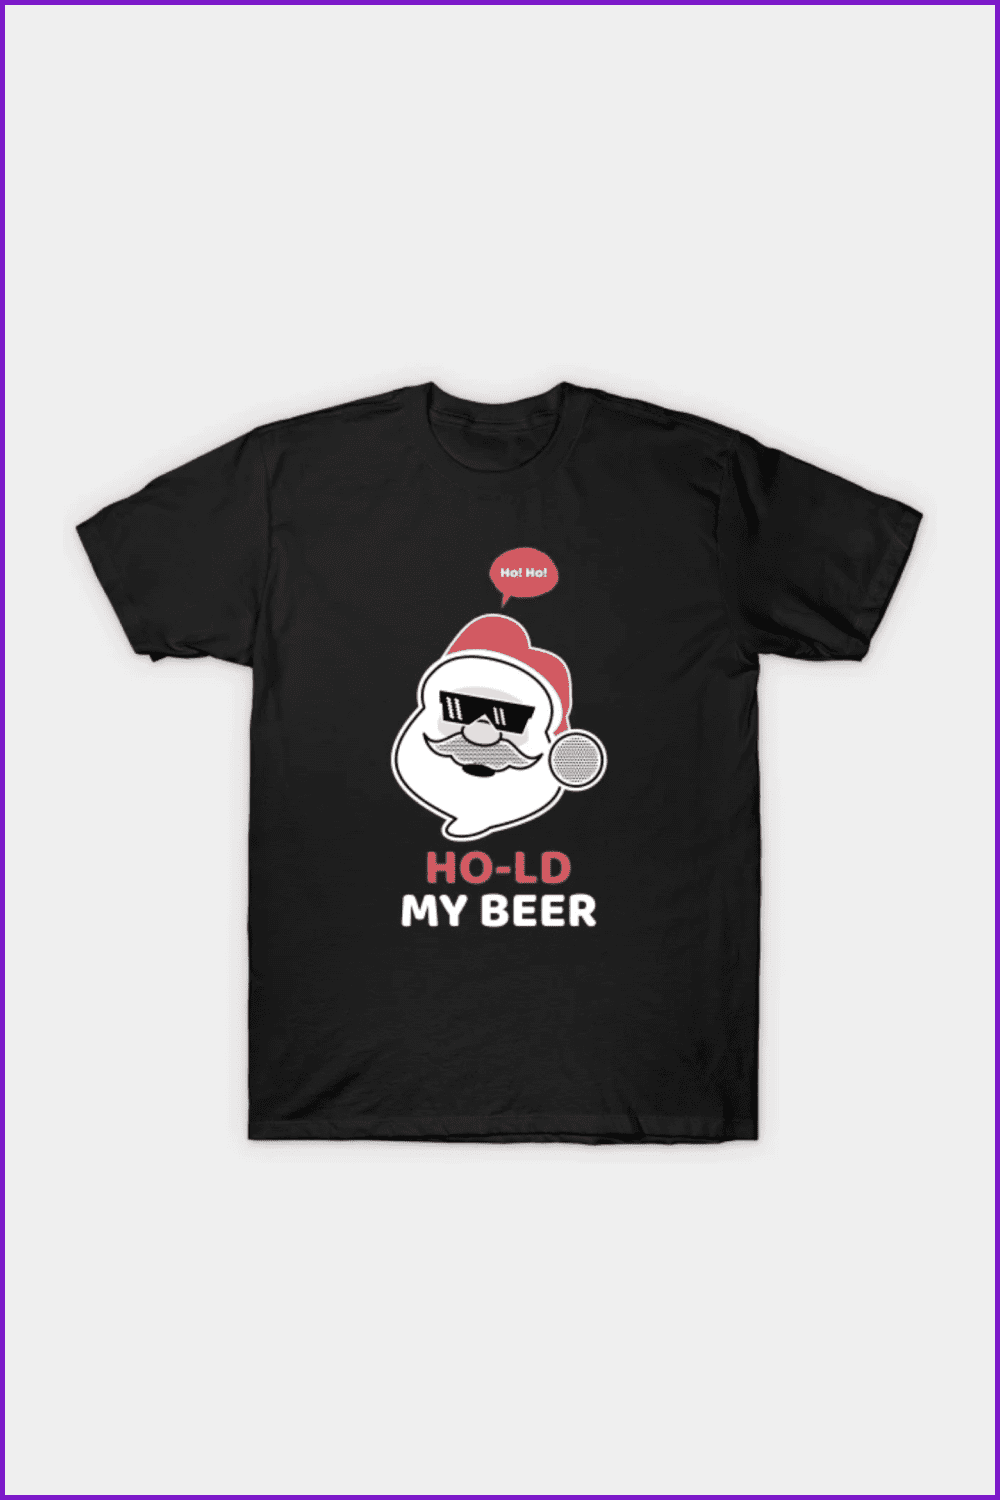 Black t-shirt with a Santa in black sunglasses says Ho-ho-hold my beer.